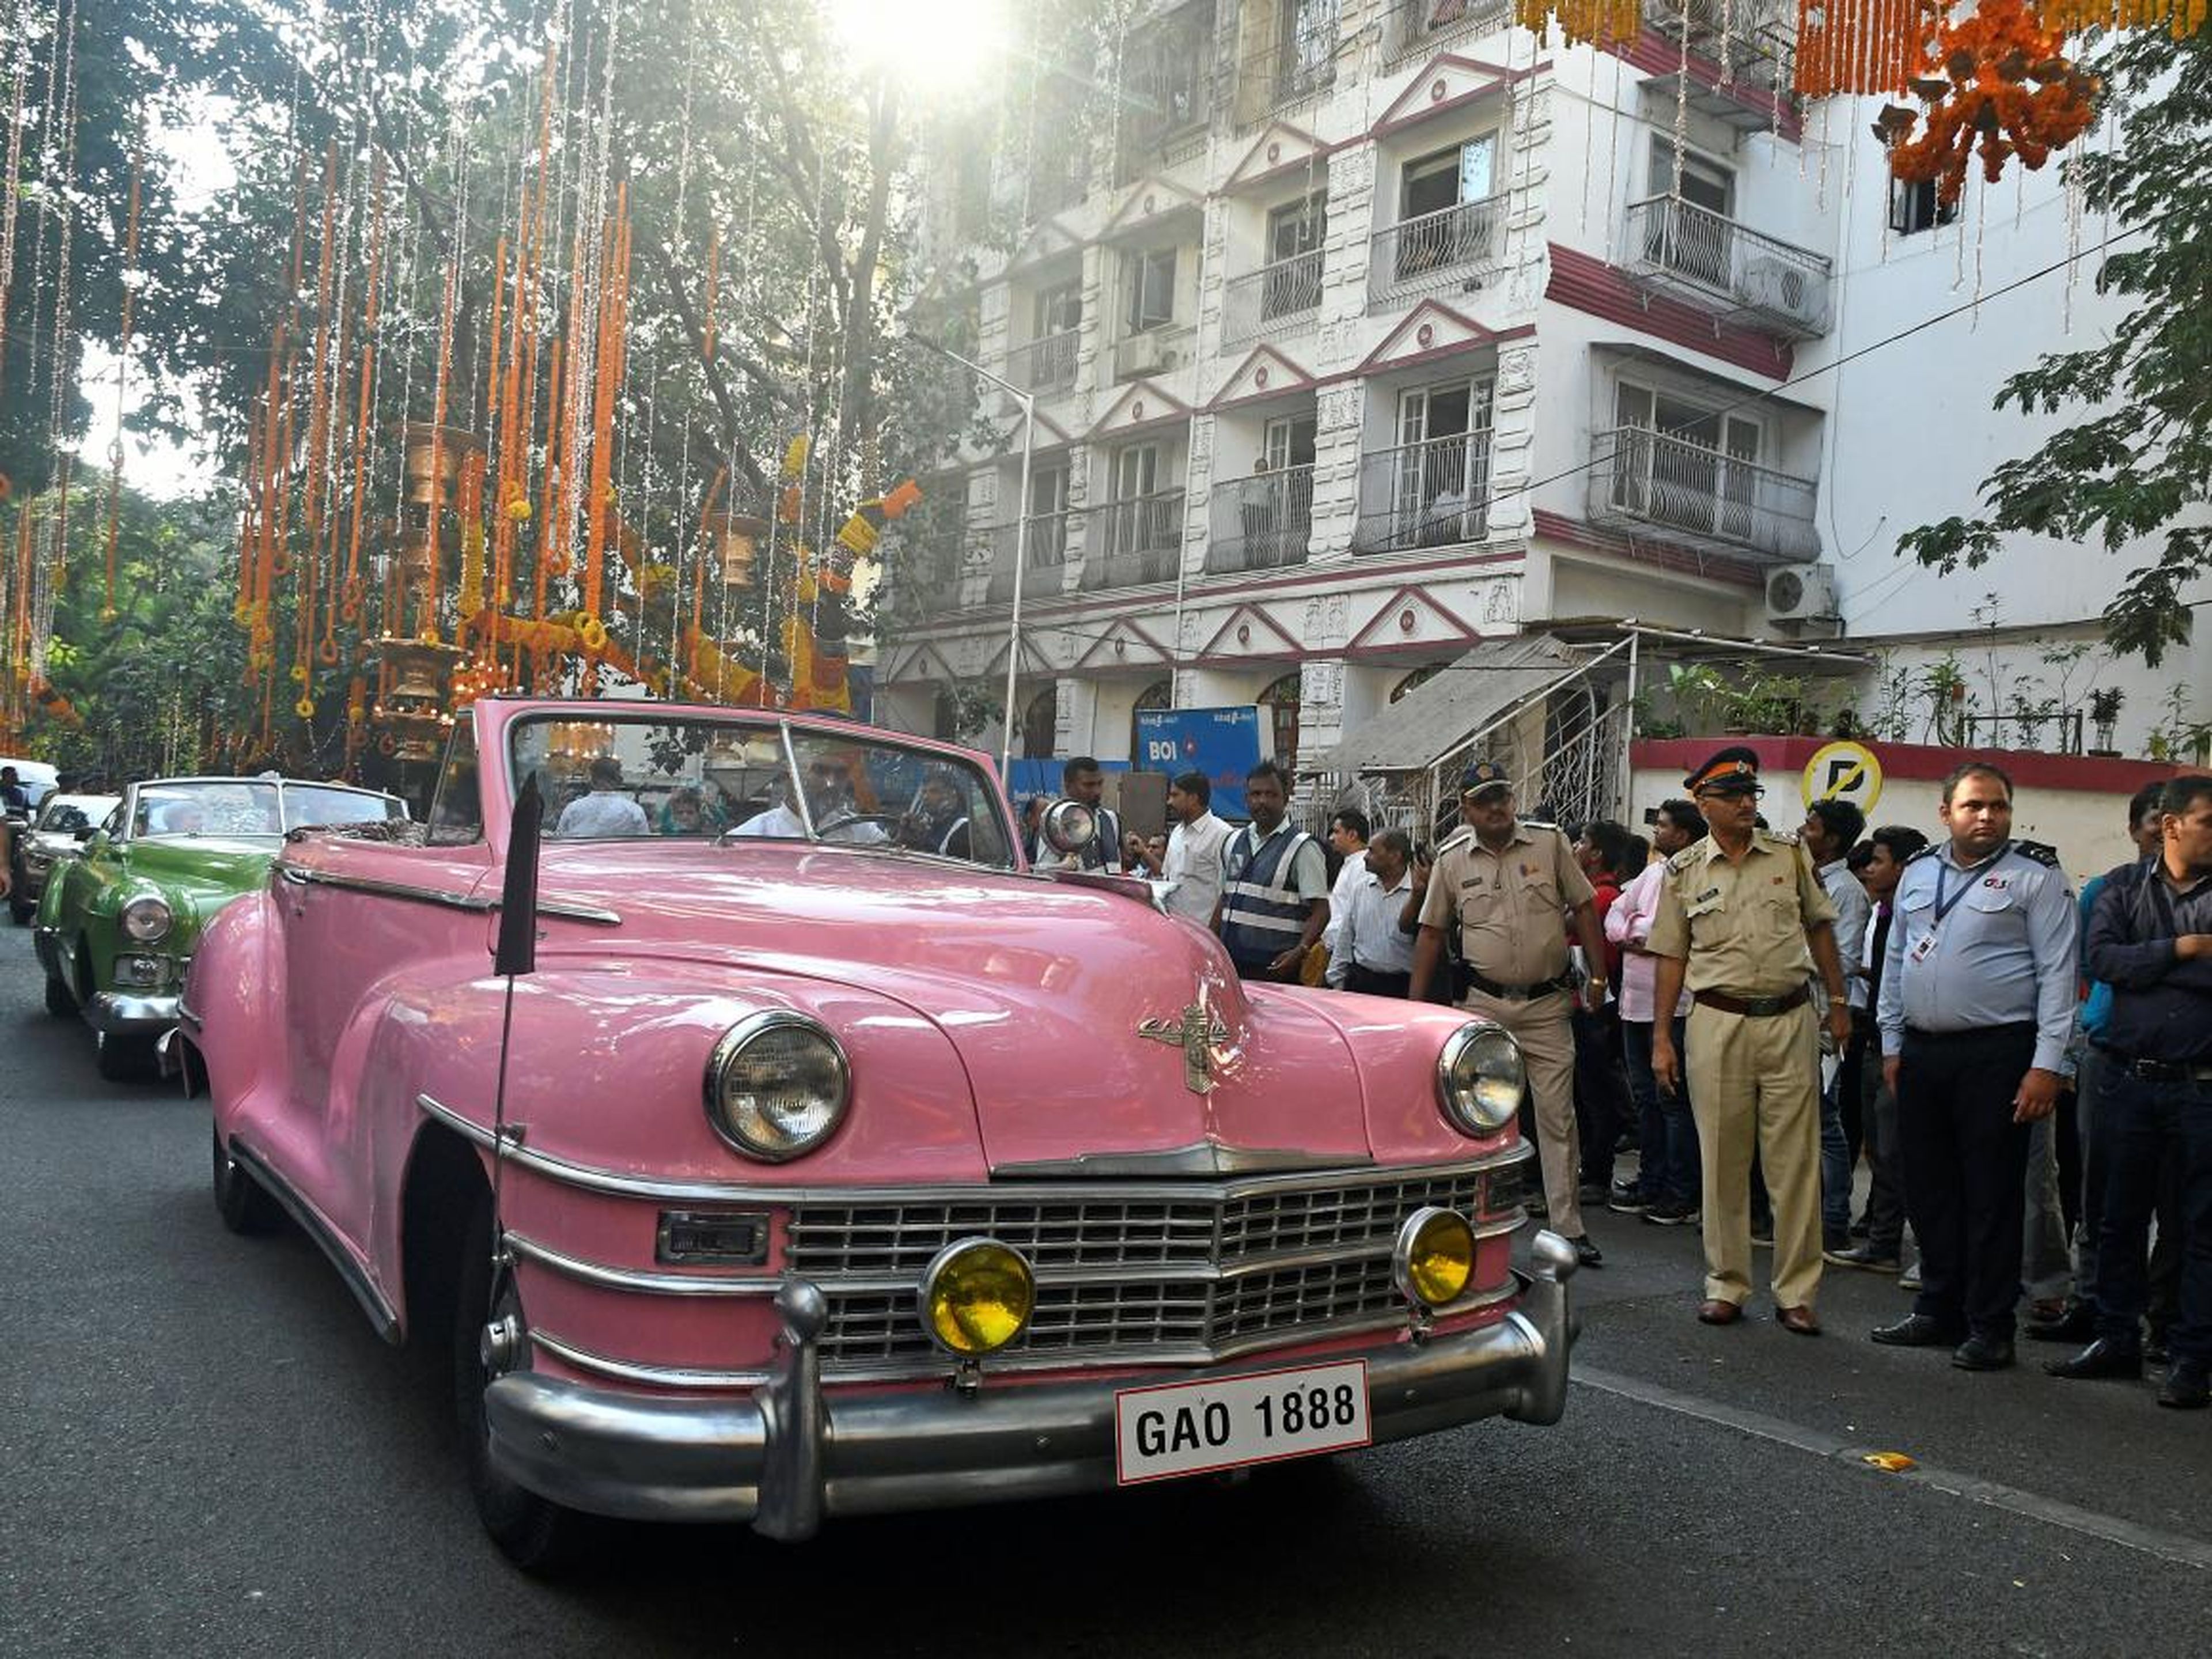 Vintage cars carried guests during the wedding procession.